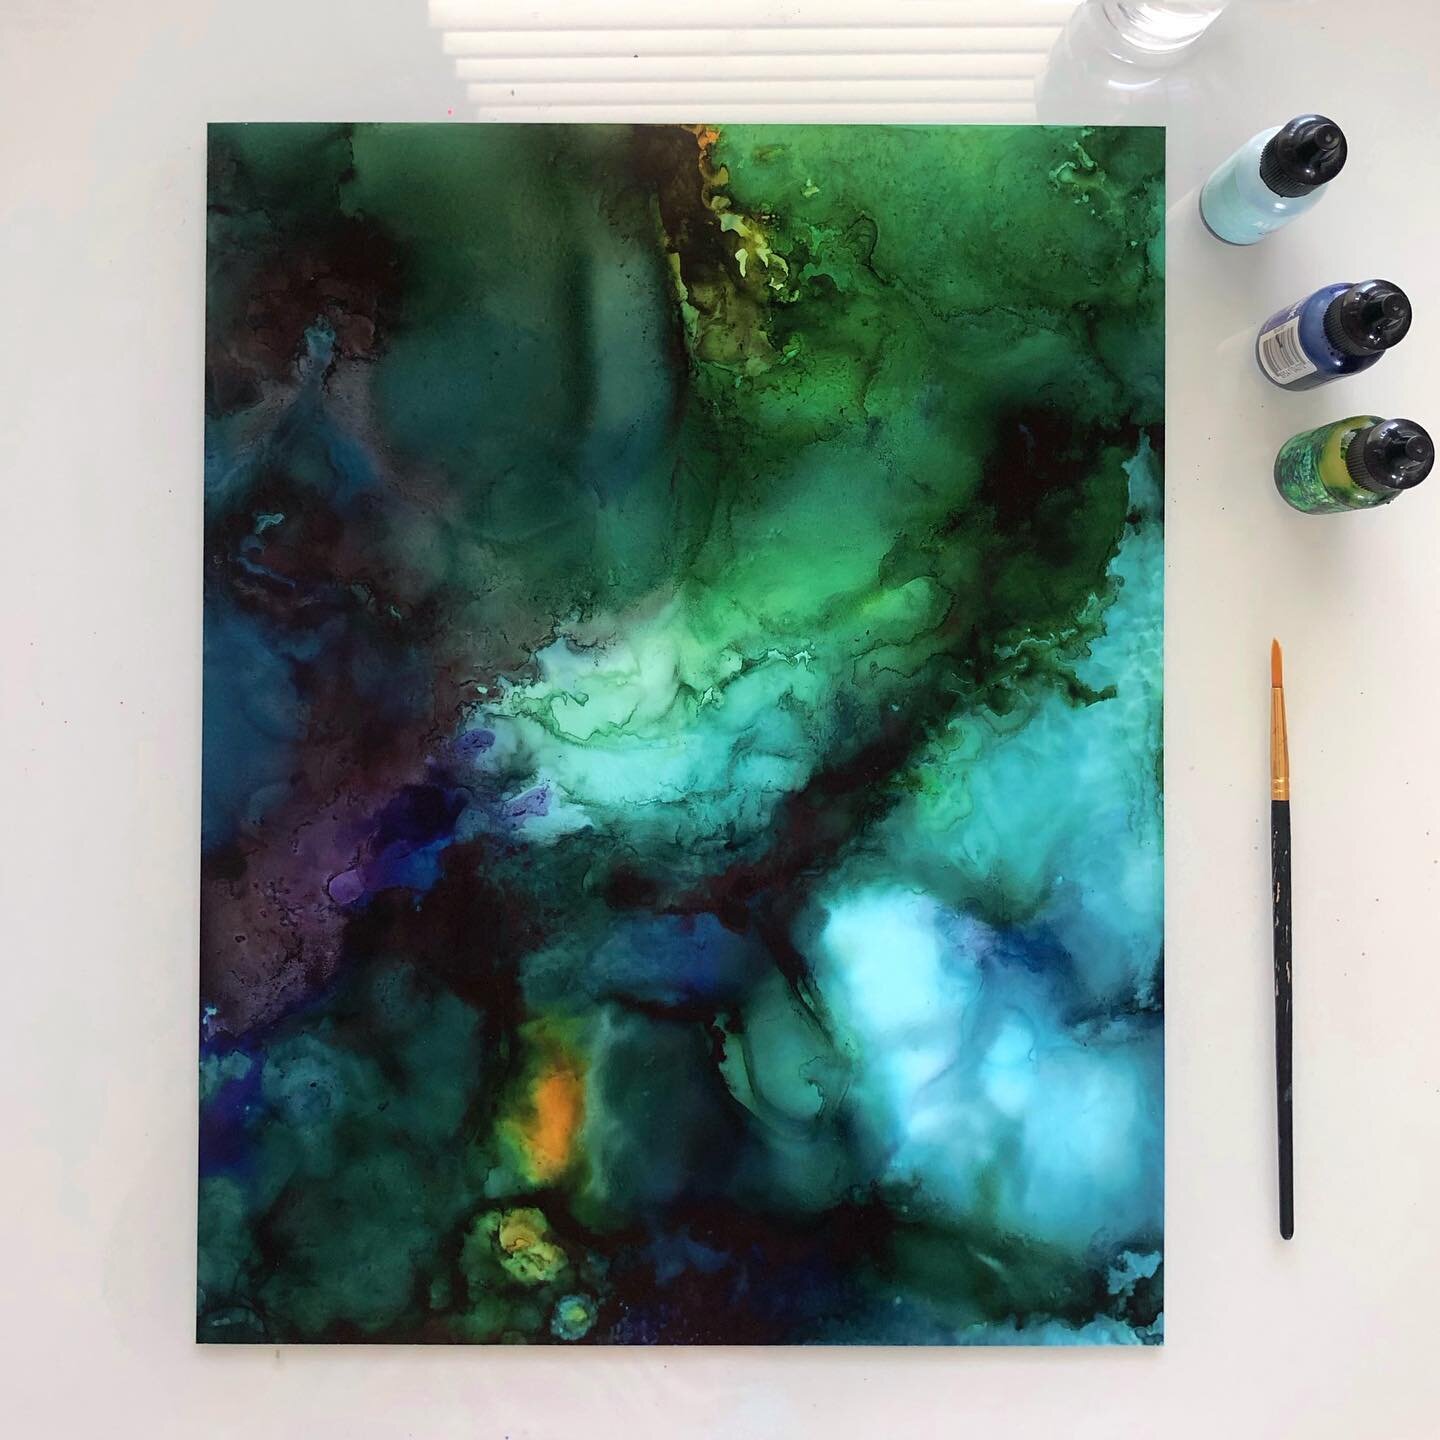 &lsquo;Milo&rsquo; - 11x14 alcohol inks on yupo. Something about the deep greens and blues get me every time 😍. The original of this one now resides in @allenstone home, but I always have prints available, so please hit me up!

.
.
.
.
.
#inspiratio